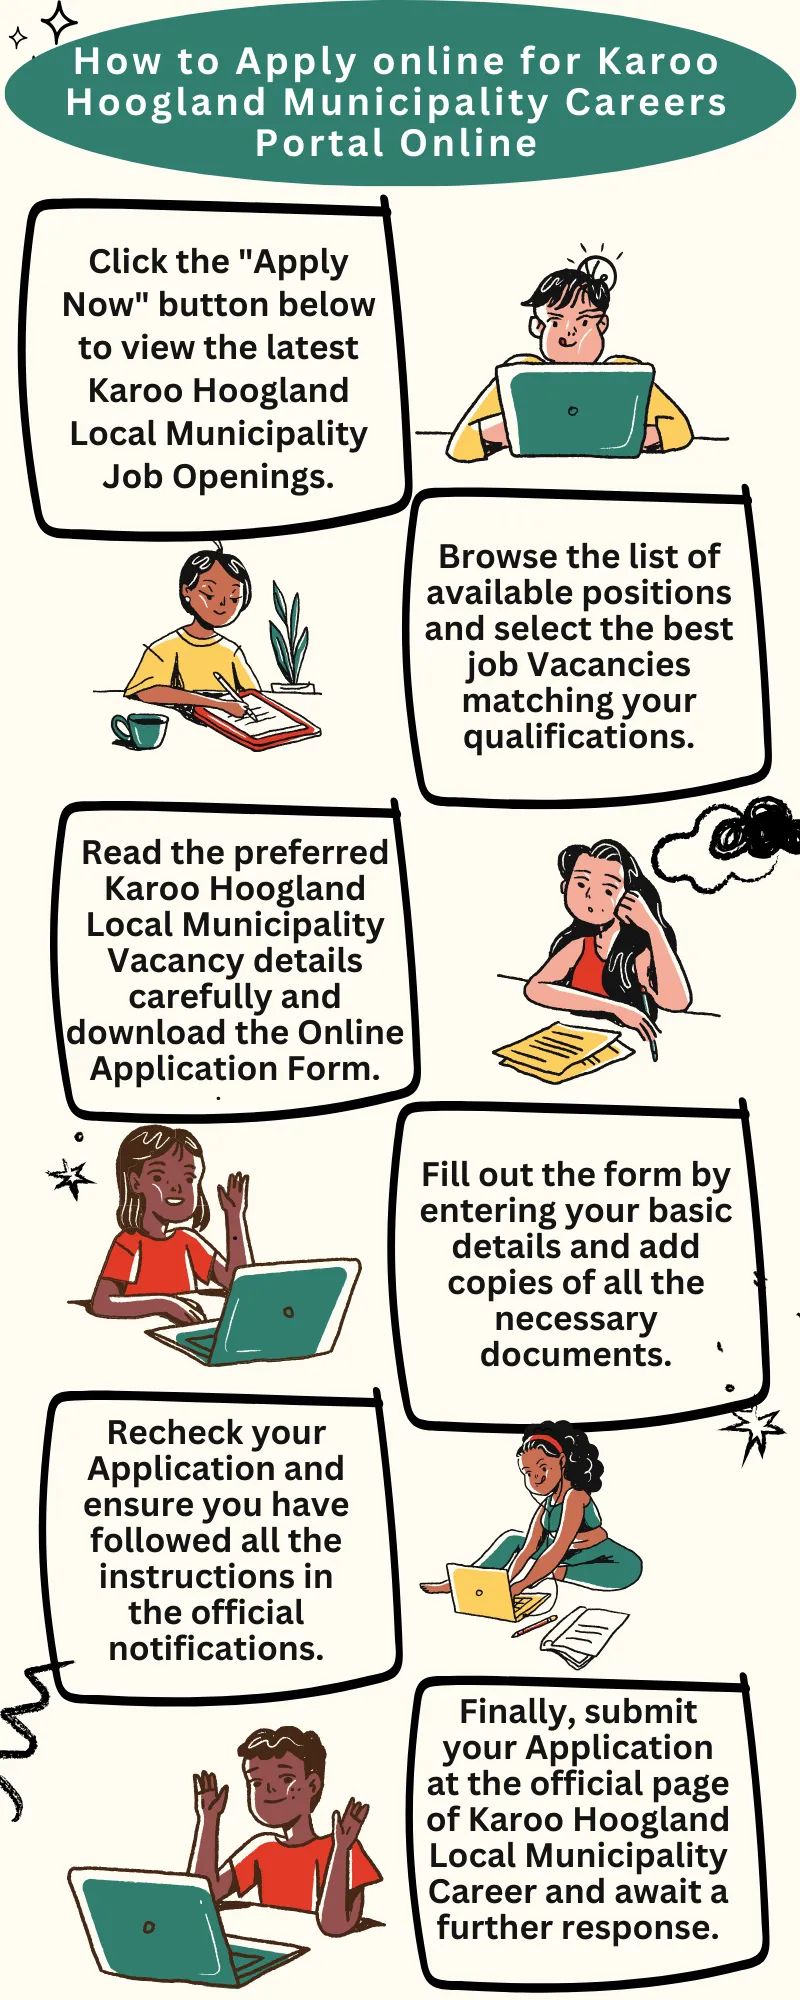 How to Apply online for Karoo Hoogland Municipality Careers Portal Online